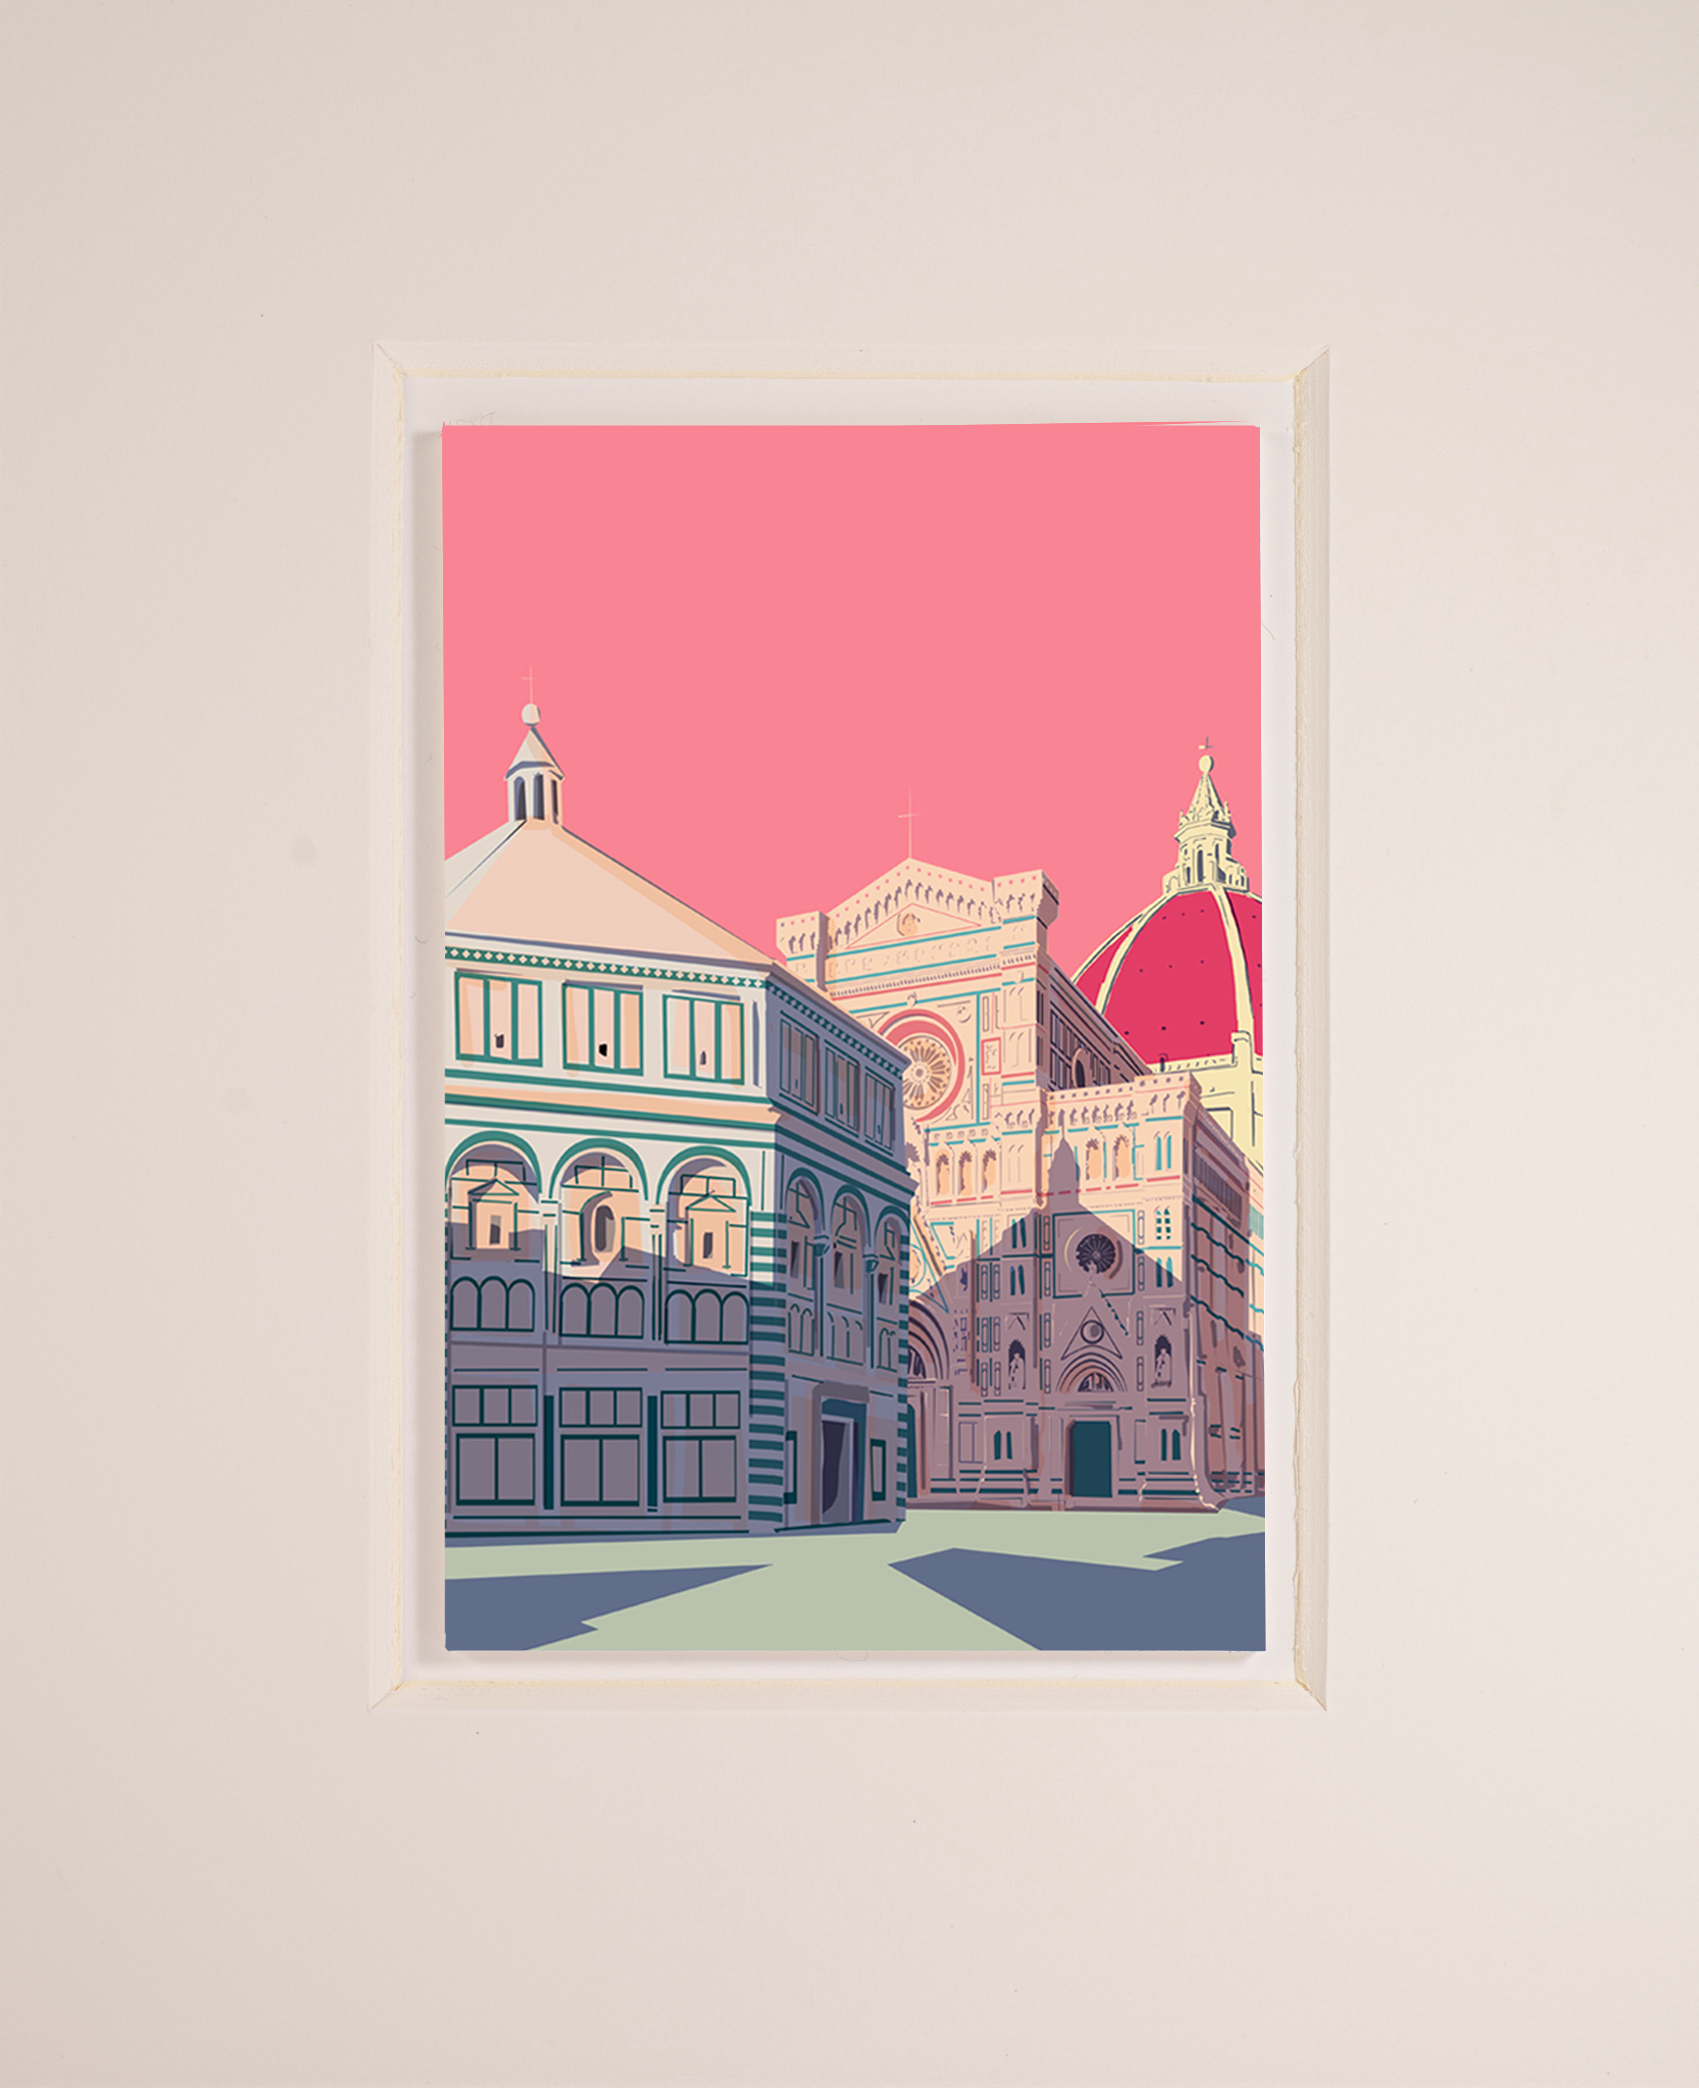 røre ved Mere end noget andet pistol Piazza Duomo, Santa Maria del Fiore square, illustration, prestigious Fine  Art Print — Florence Factory - shop our collection of local contemporary  craftsmen and designer. Only from Florence or Tuscany.